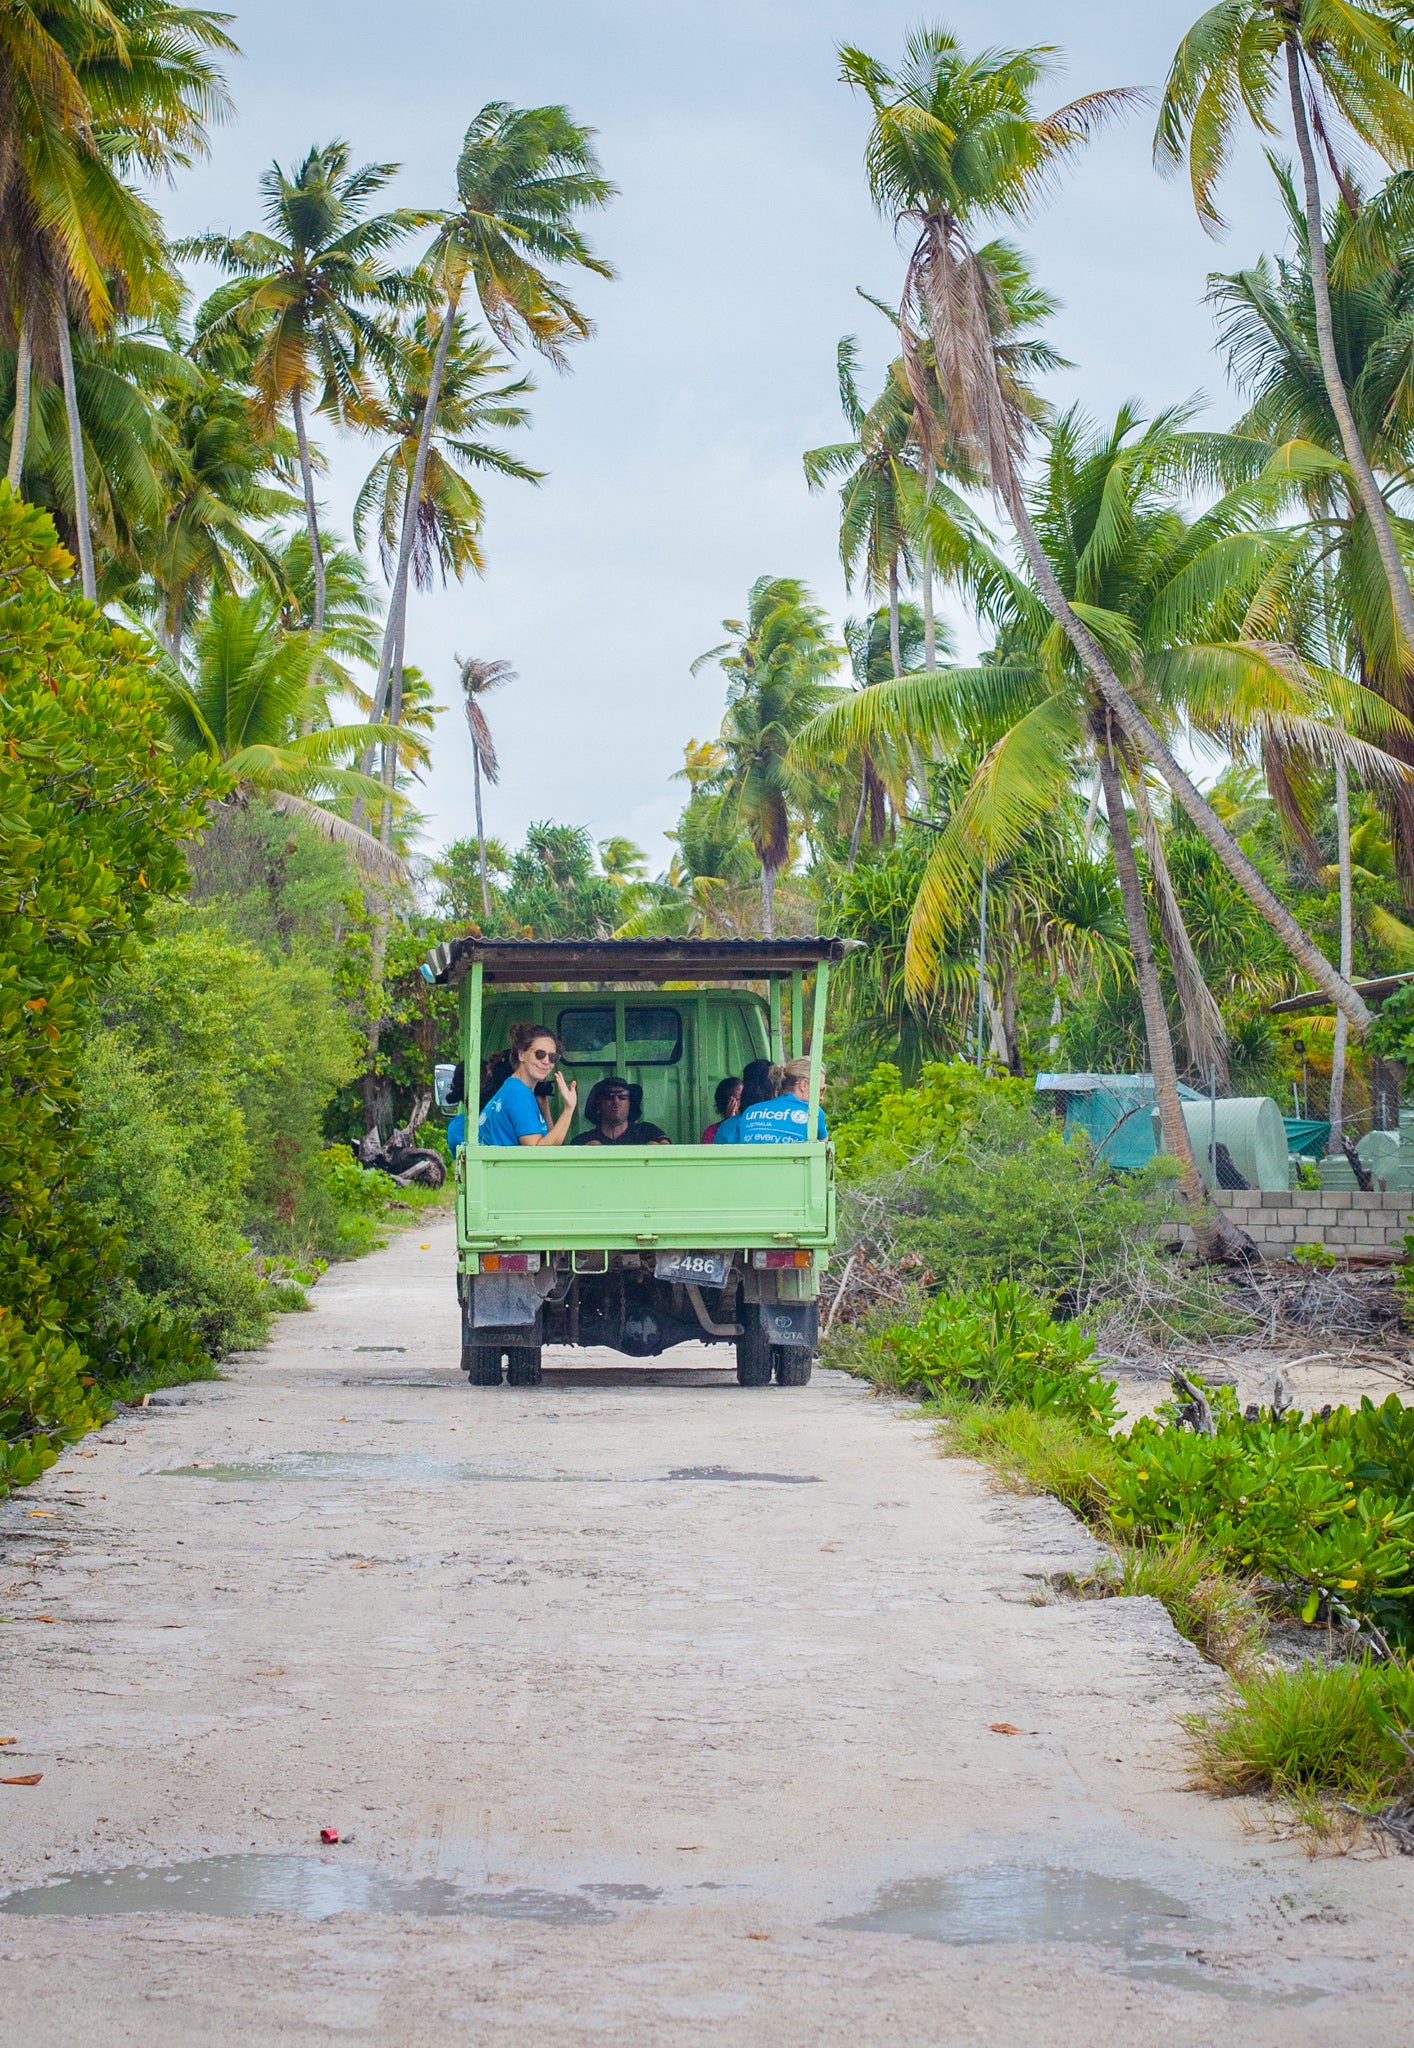 UNICEF staff in a truck travelling through the island nation of Kiribati